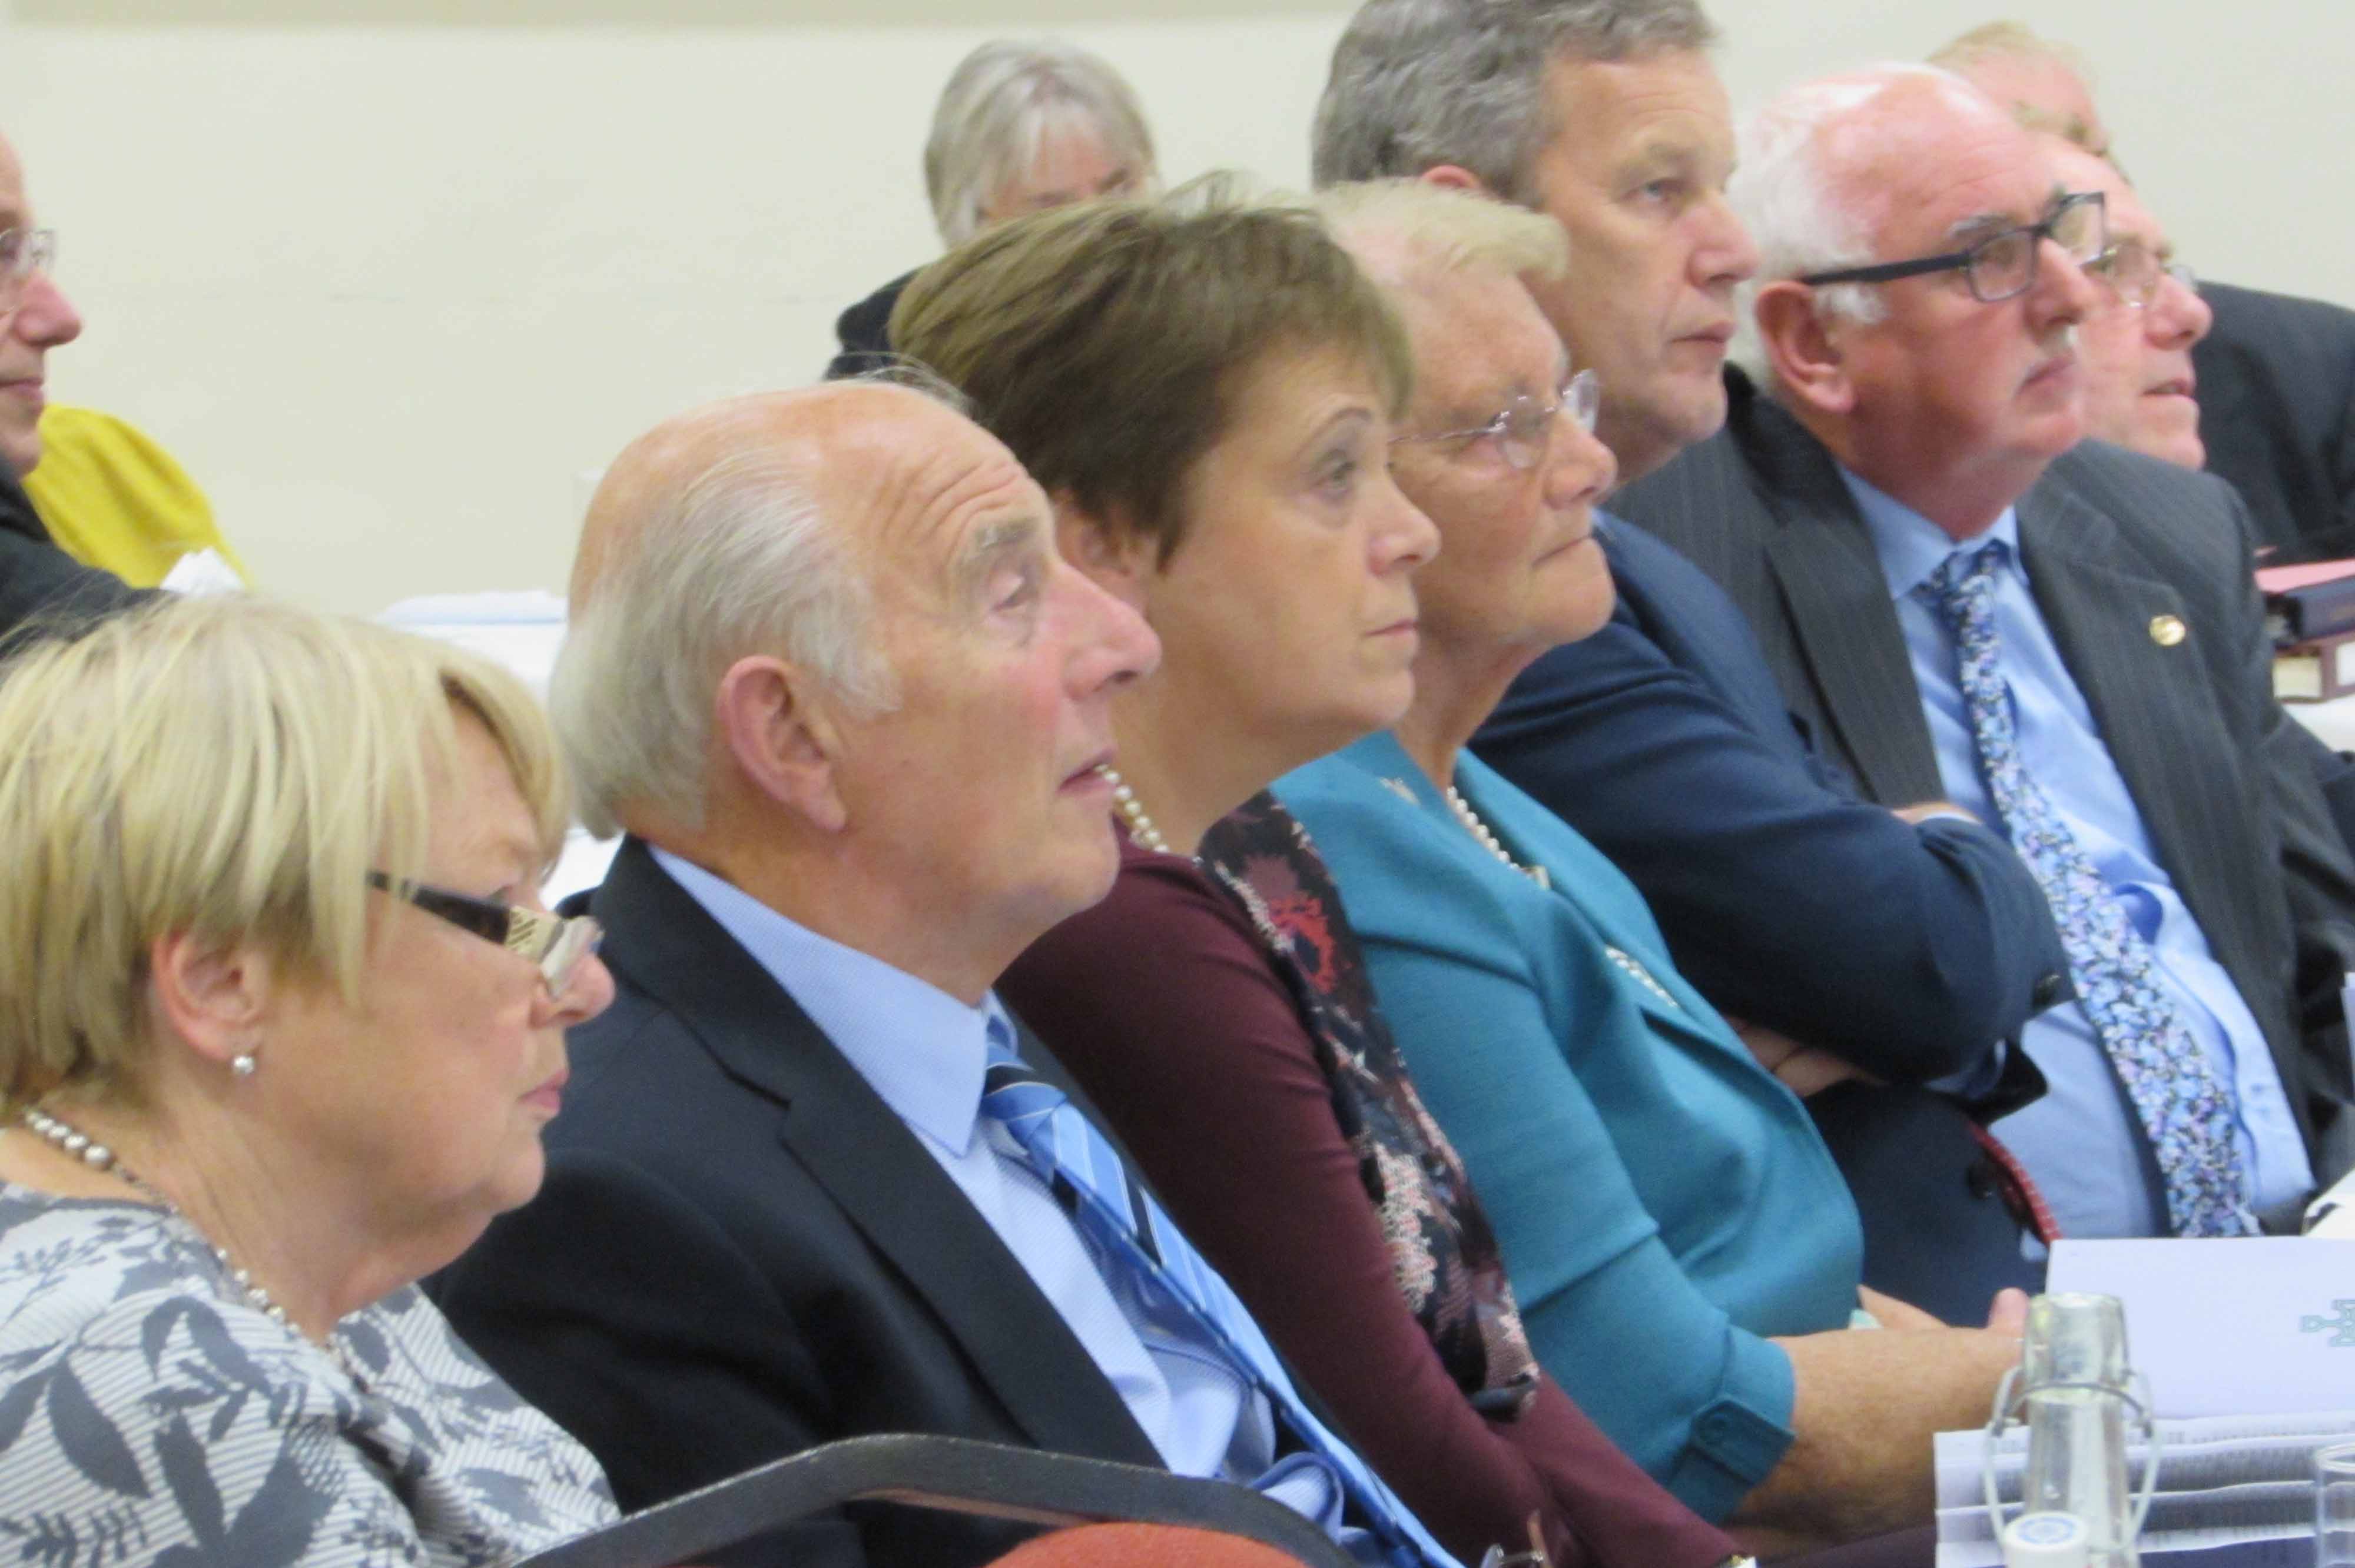 Members of Clogher Diocesan Synod listening to some of the presentations.